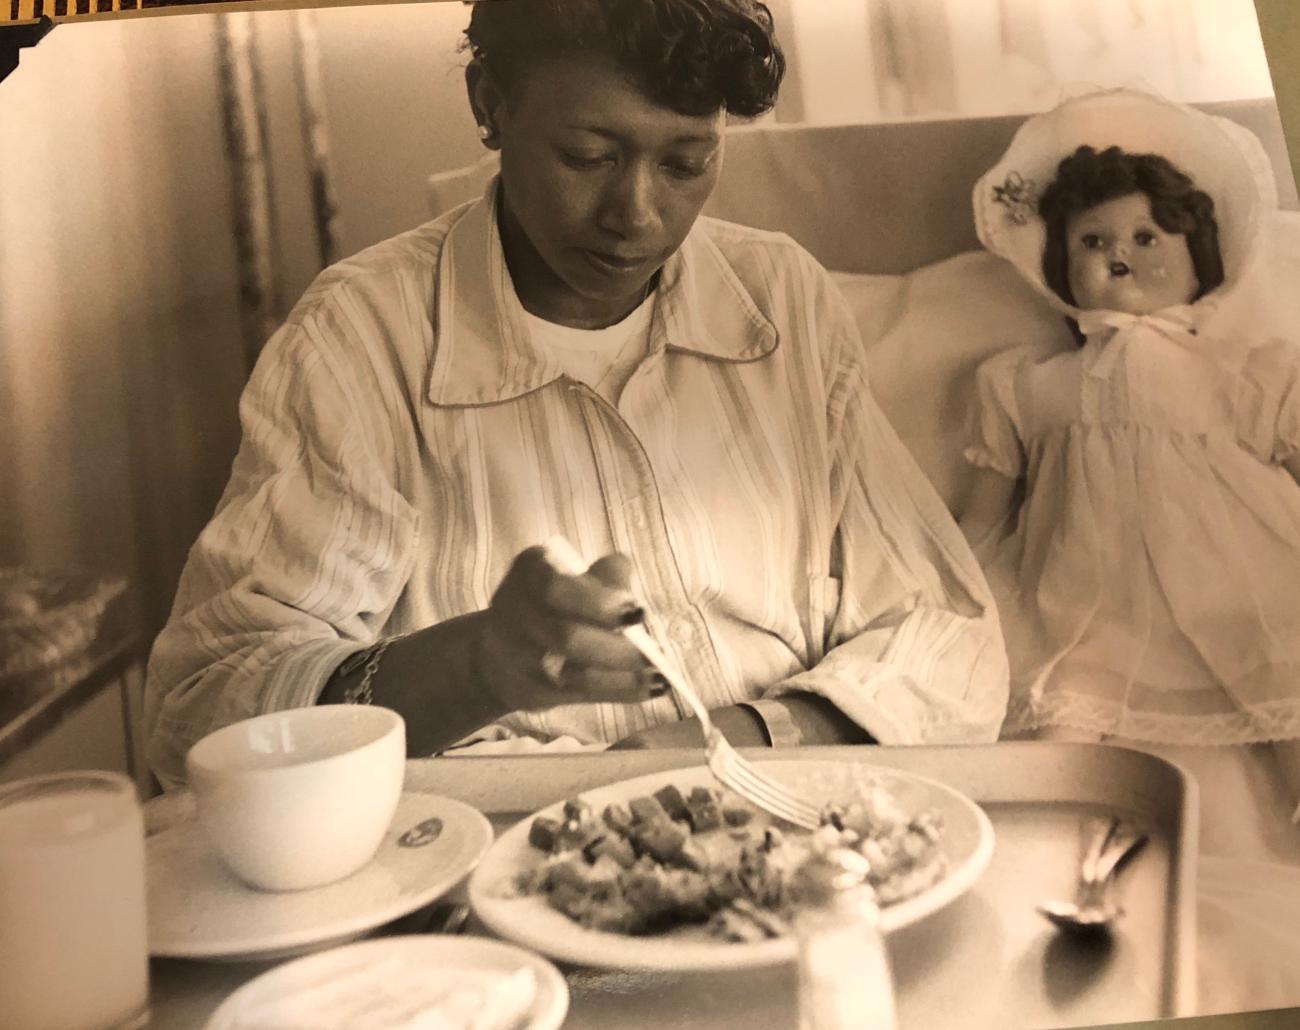 A patient eats a meal at Sea View's women's pavilion in the early 1950s.